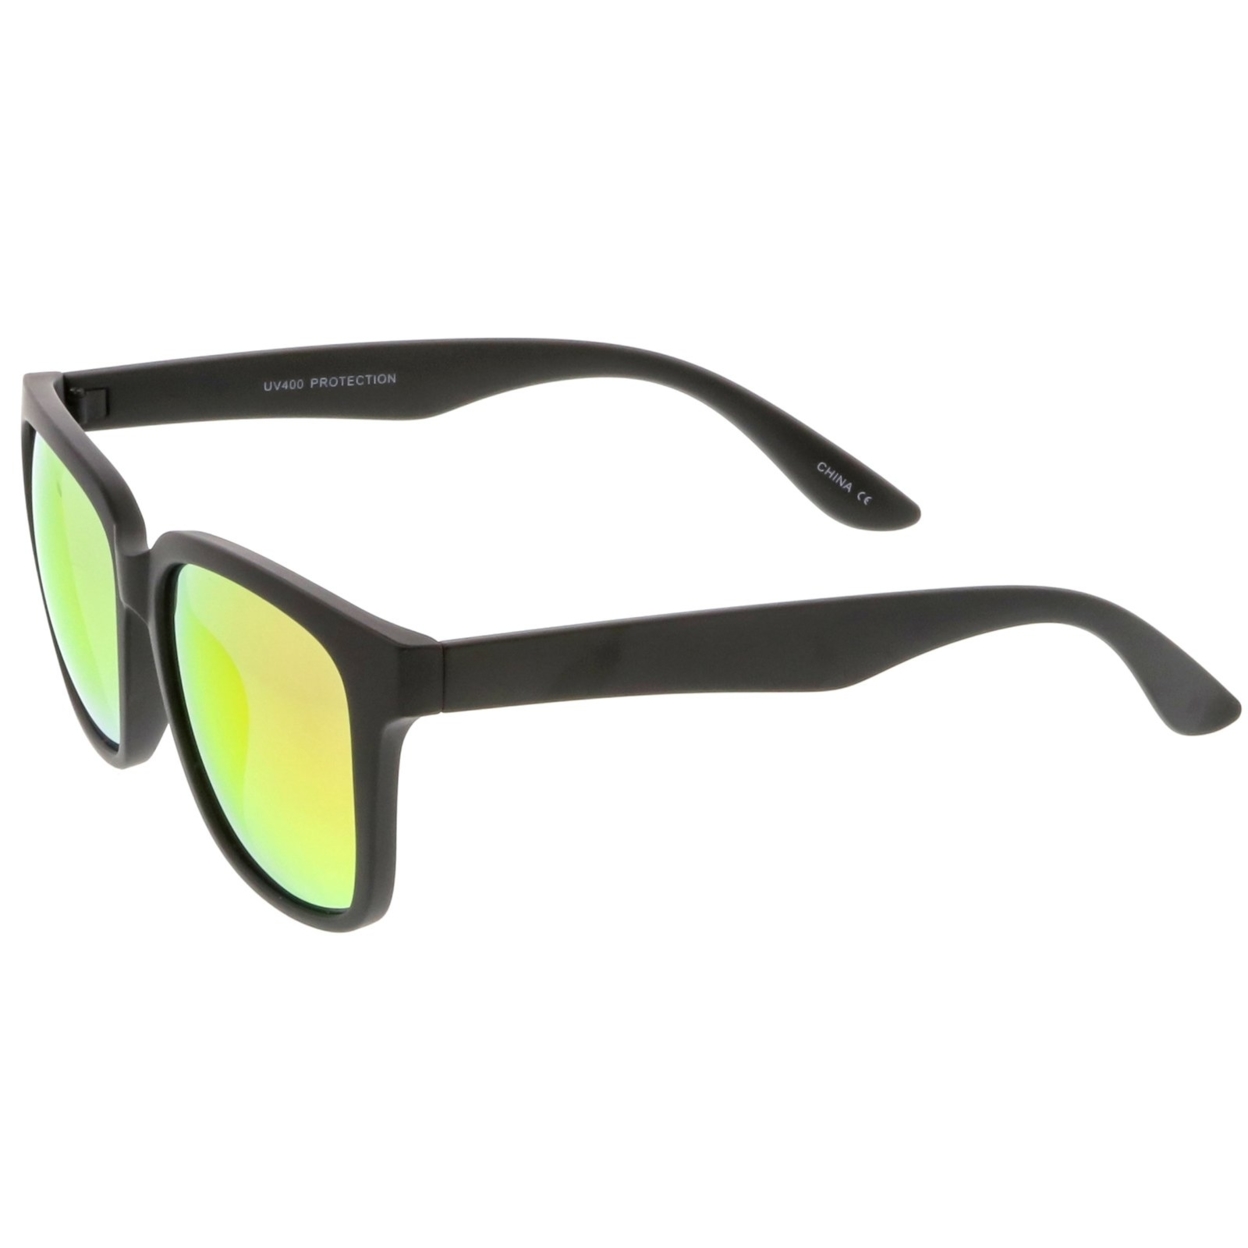 Large Horn Rimmed Sunglasses With Wide Arms Mirrored Square Lens 57mm - Shiny Black / Green Mirror